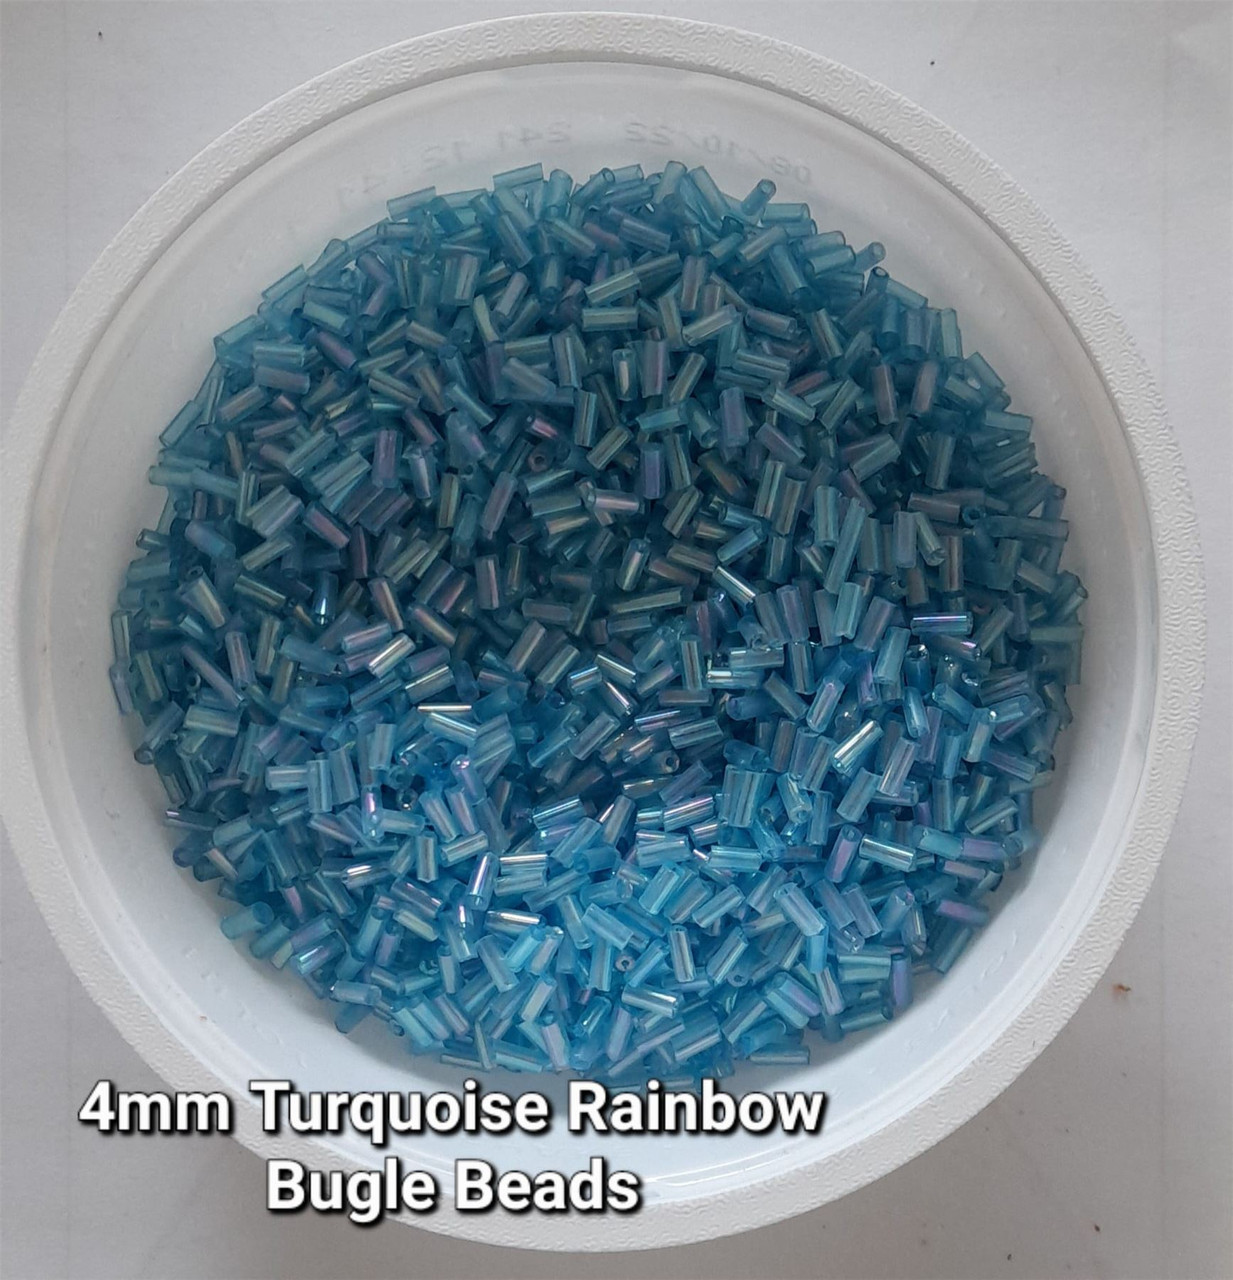 50g glass bugle beads - Turquoise Rainbow - approx 4mm